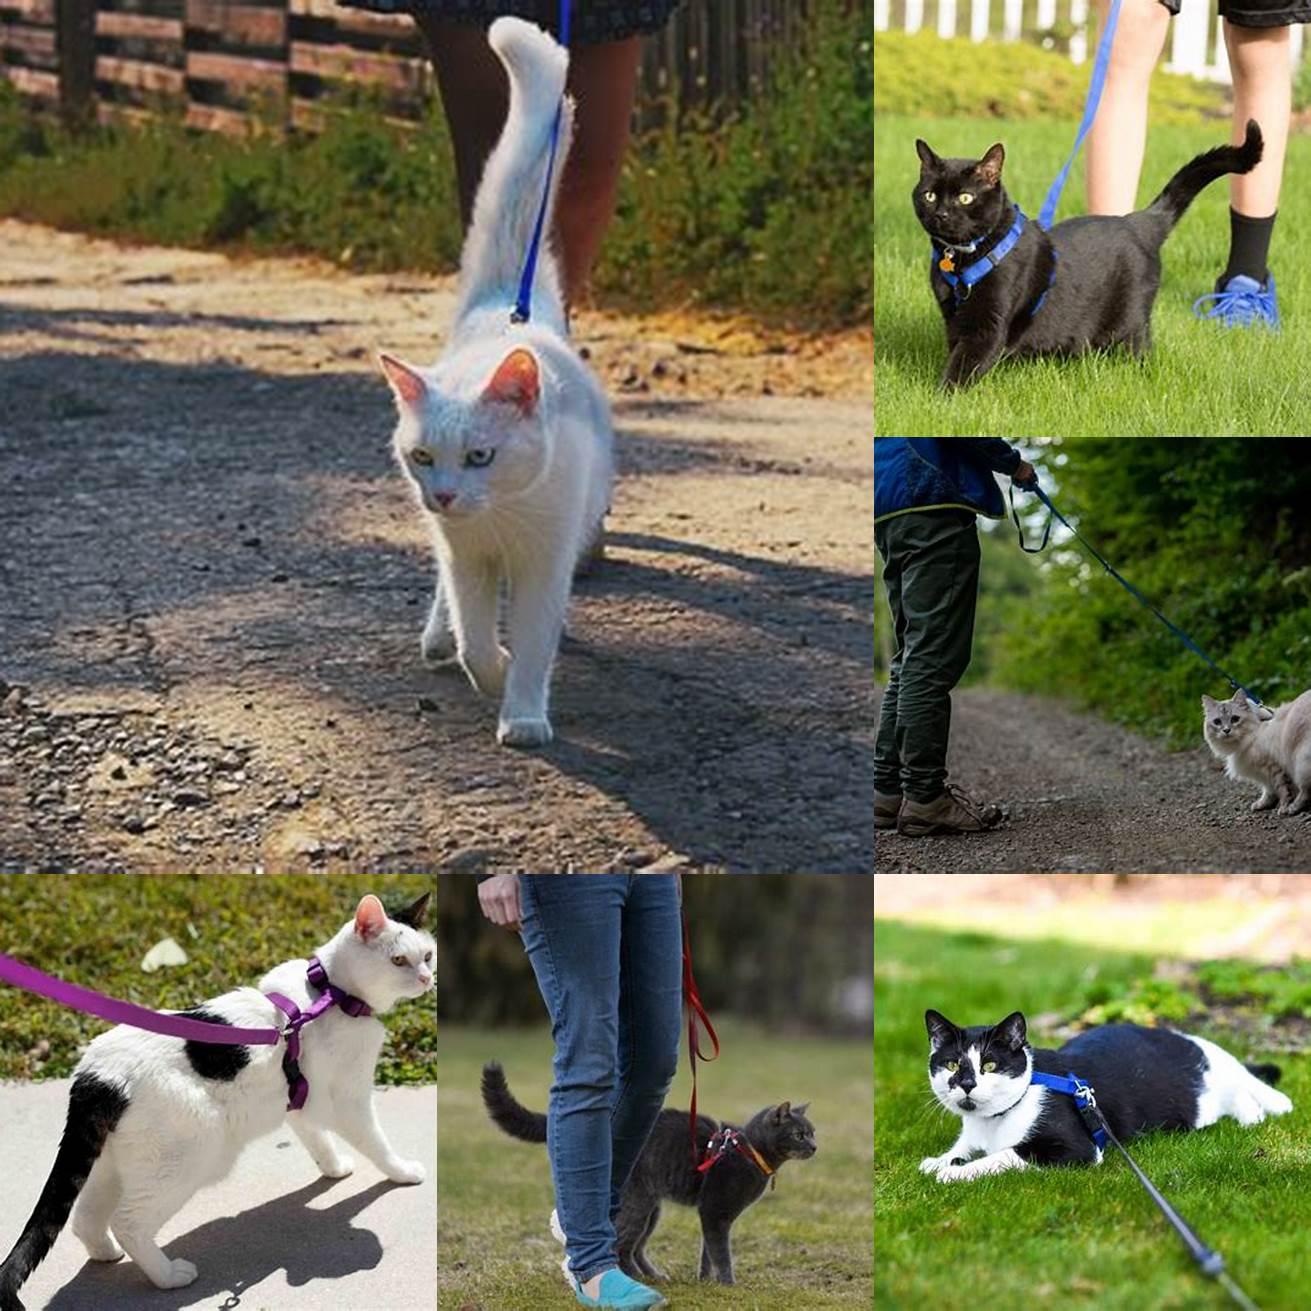 3 Bonding Walking your cat can be a great way to strengthen your bond with them